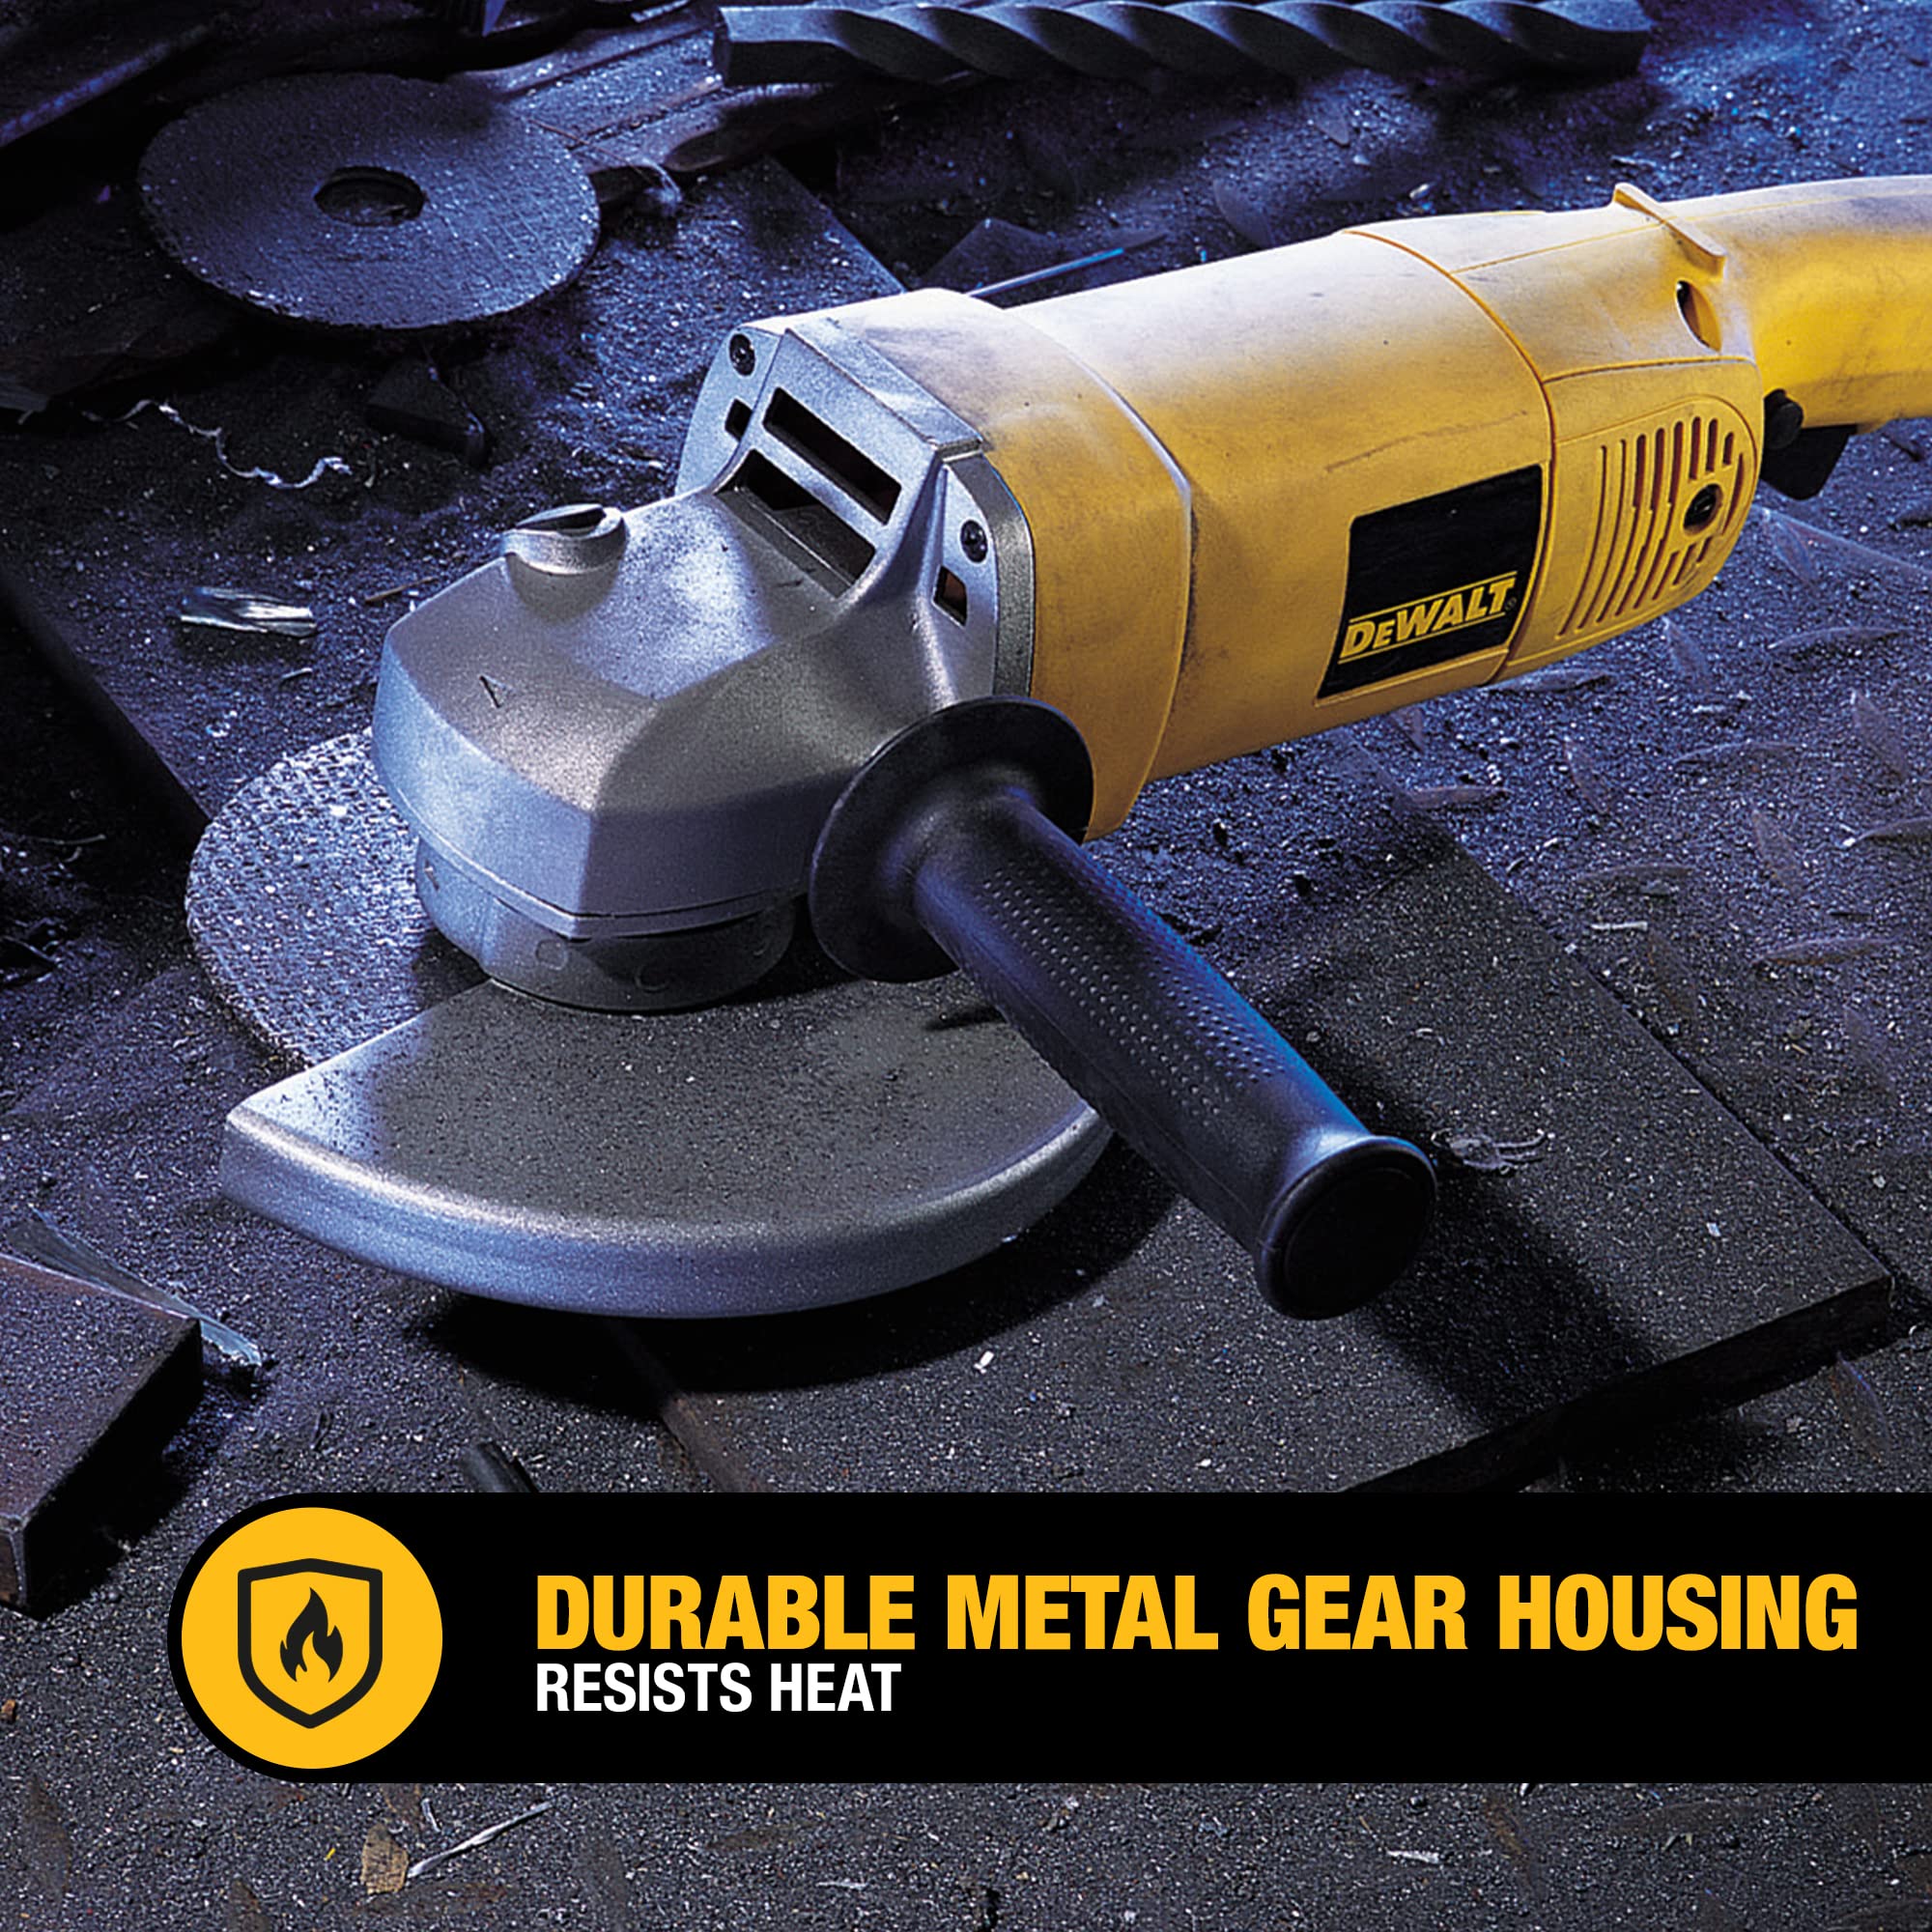 DEWALT Angle Grinder Tool Kit with Bag and Cutting Wheels, 7-Inch, 13-Amp (DW840K),Yellow